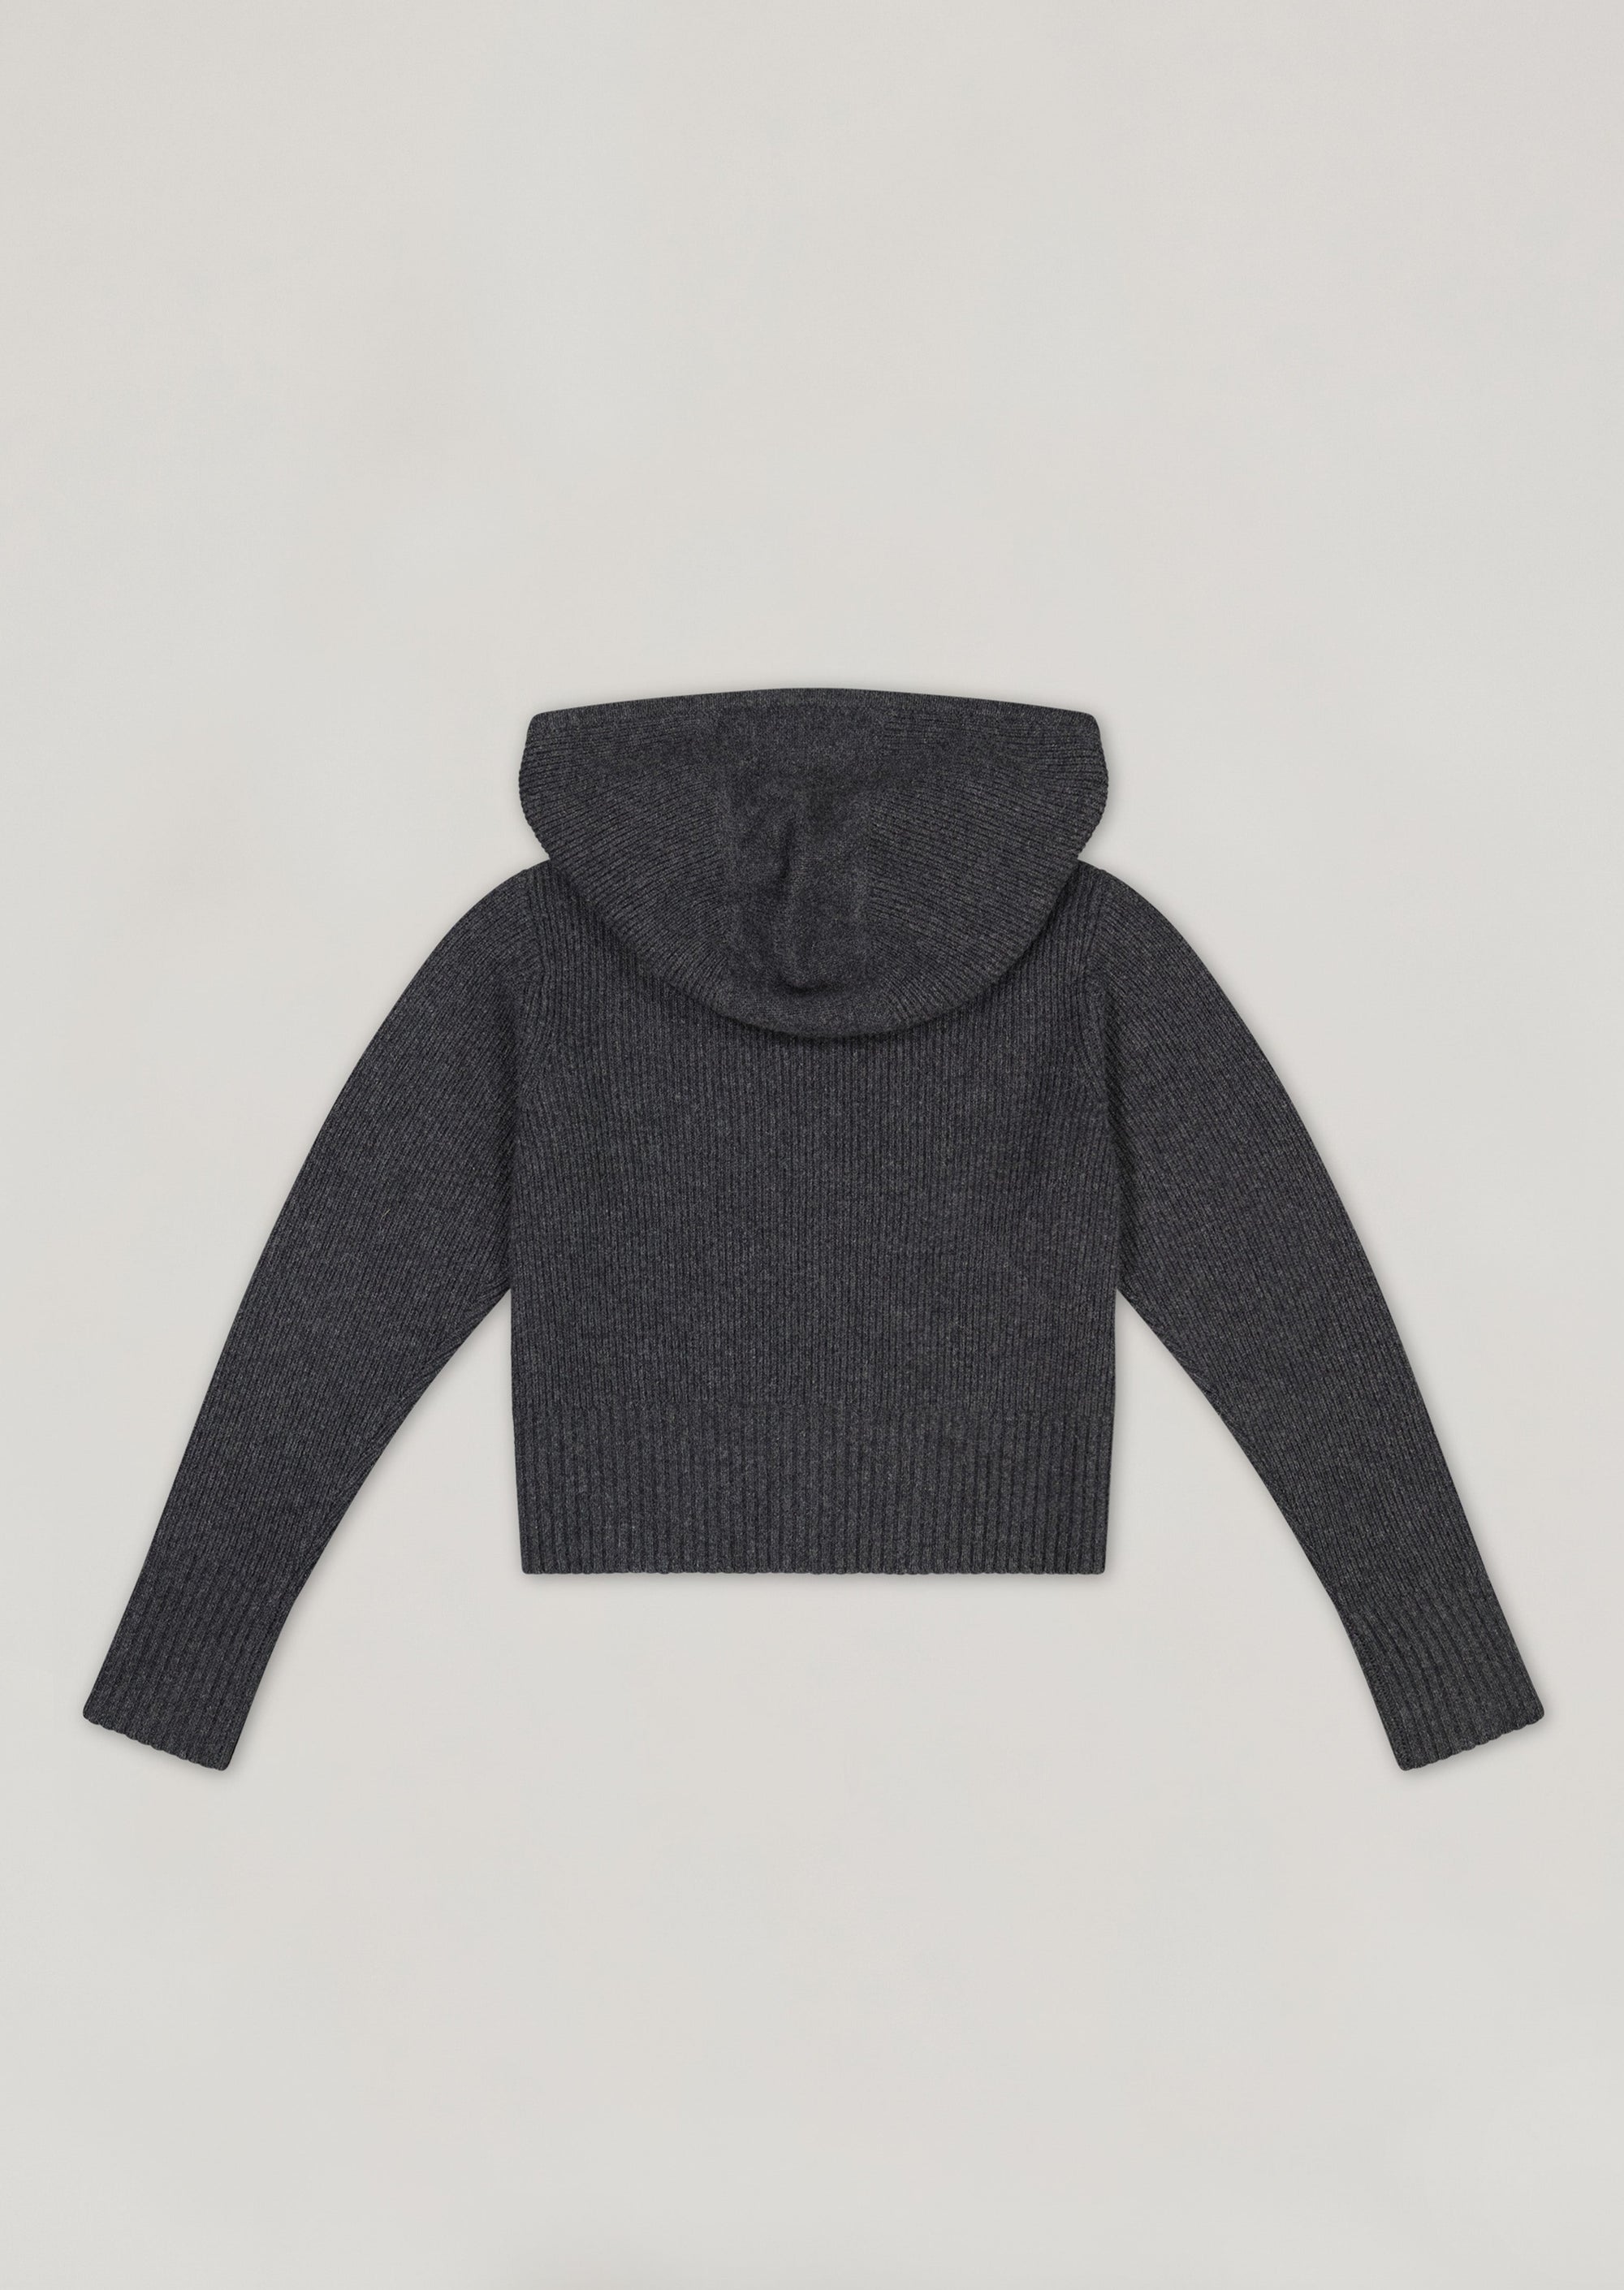 THE CASHMERE ZIP UP